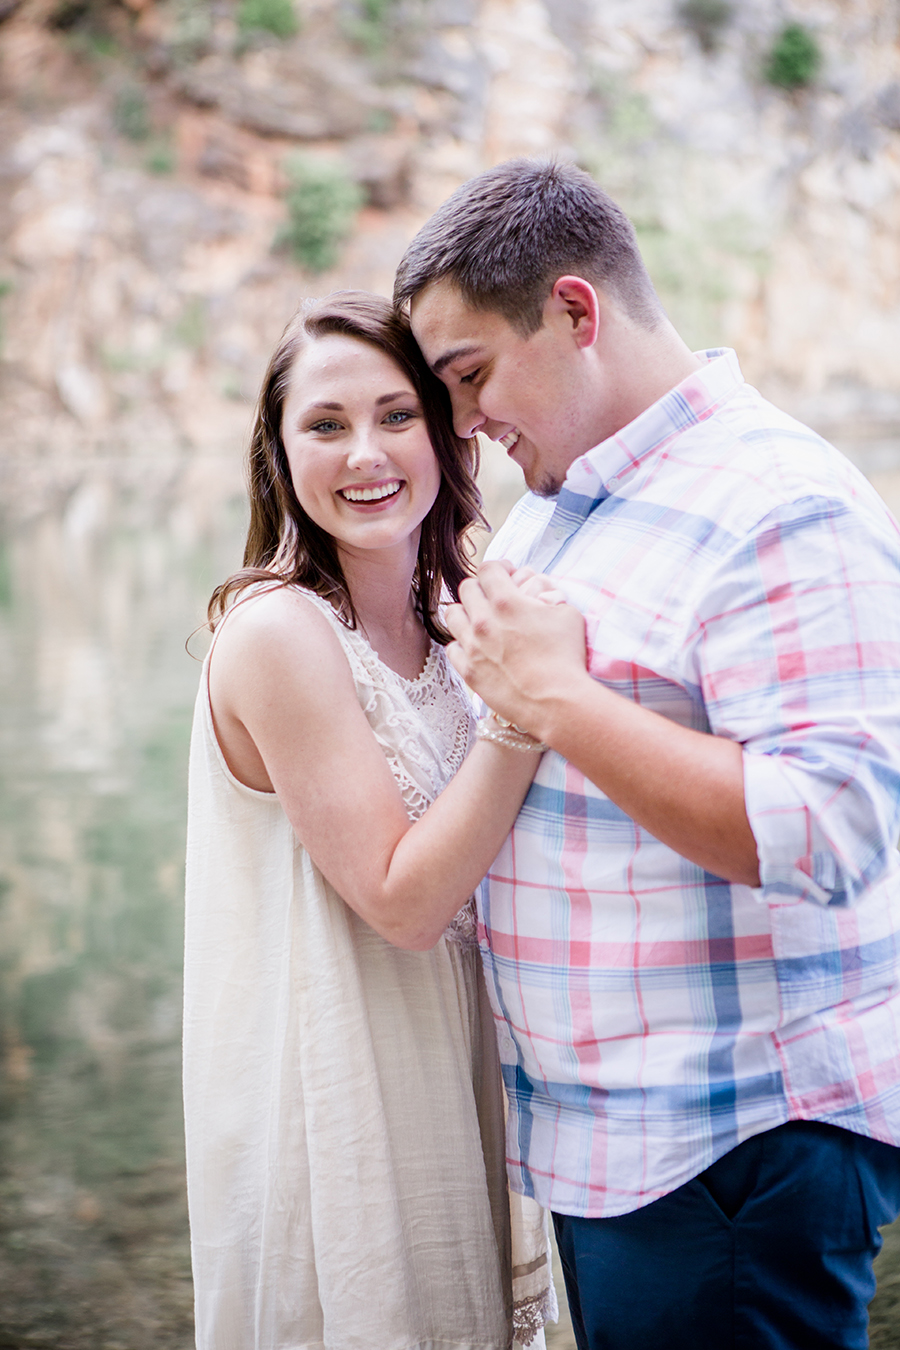 He sings in her ear engagement photo by Knoxville Wedding Photographer, Amanda May Photos.